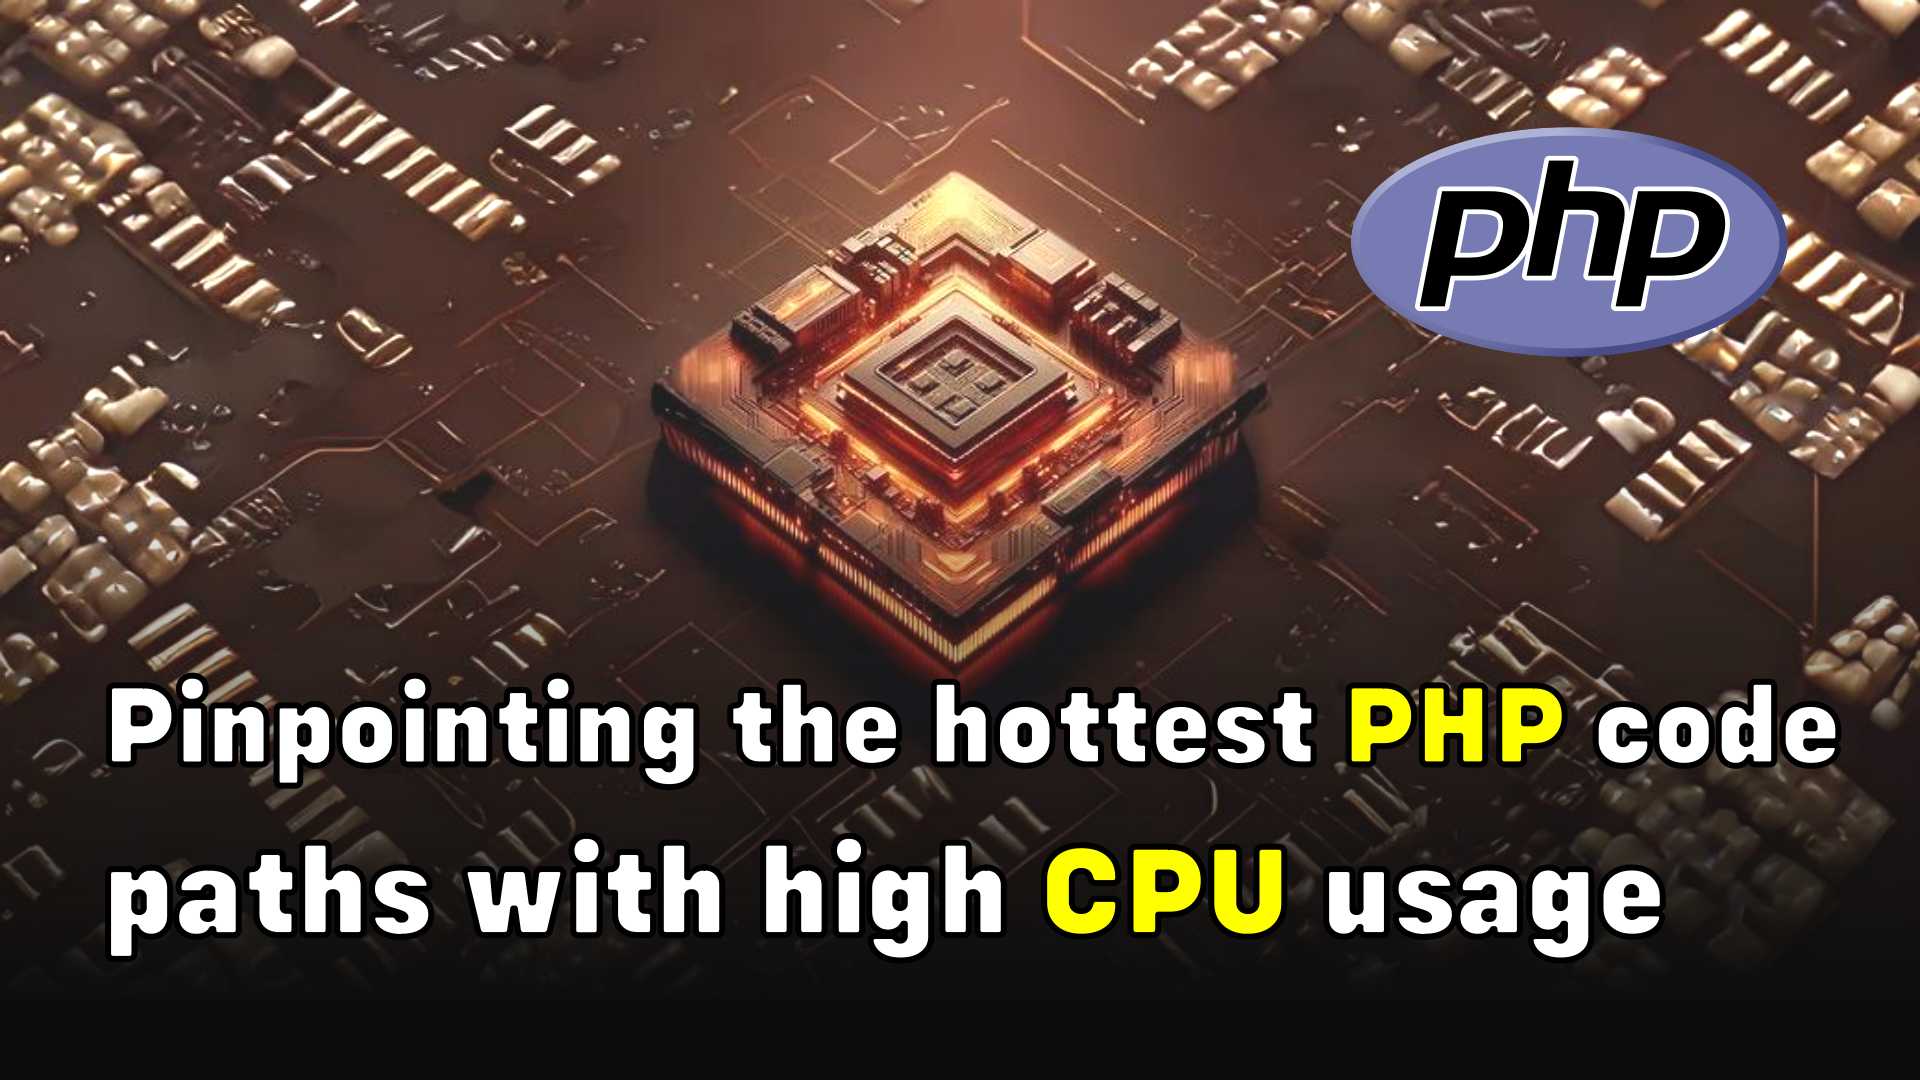 Pinpointing the hottest PHP code paths with high CPU usage (using OpenResty XRay)